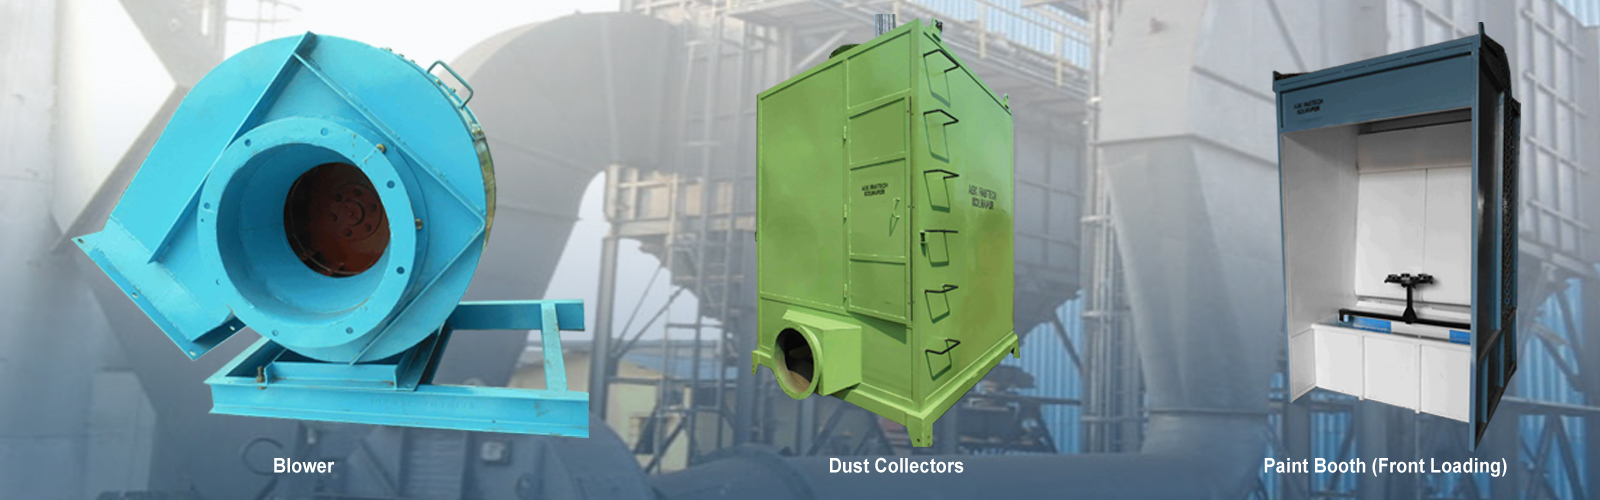 Fume Extraction Systems, Dust Collector, Industrial Dust Collector, Mancooler, Industrial Man Cooler, Exhaust Fan